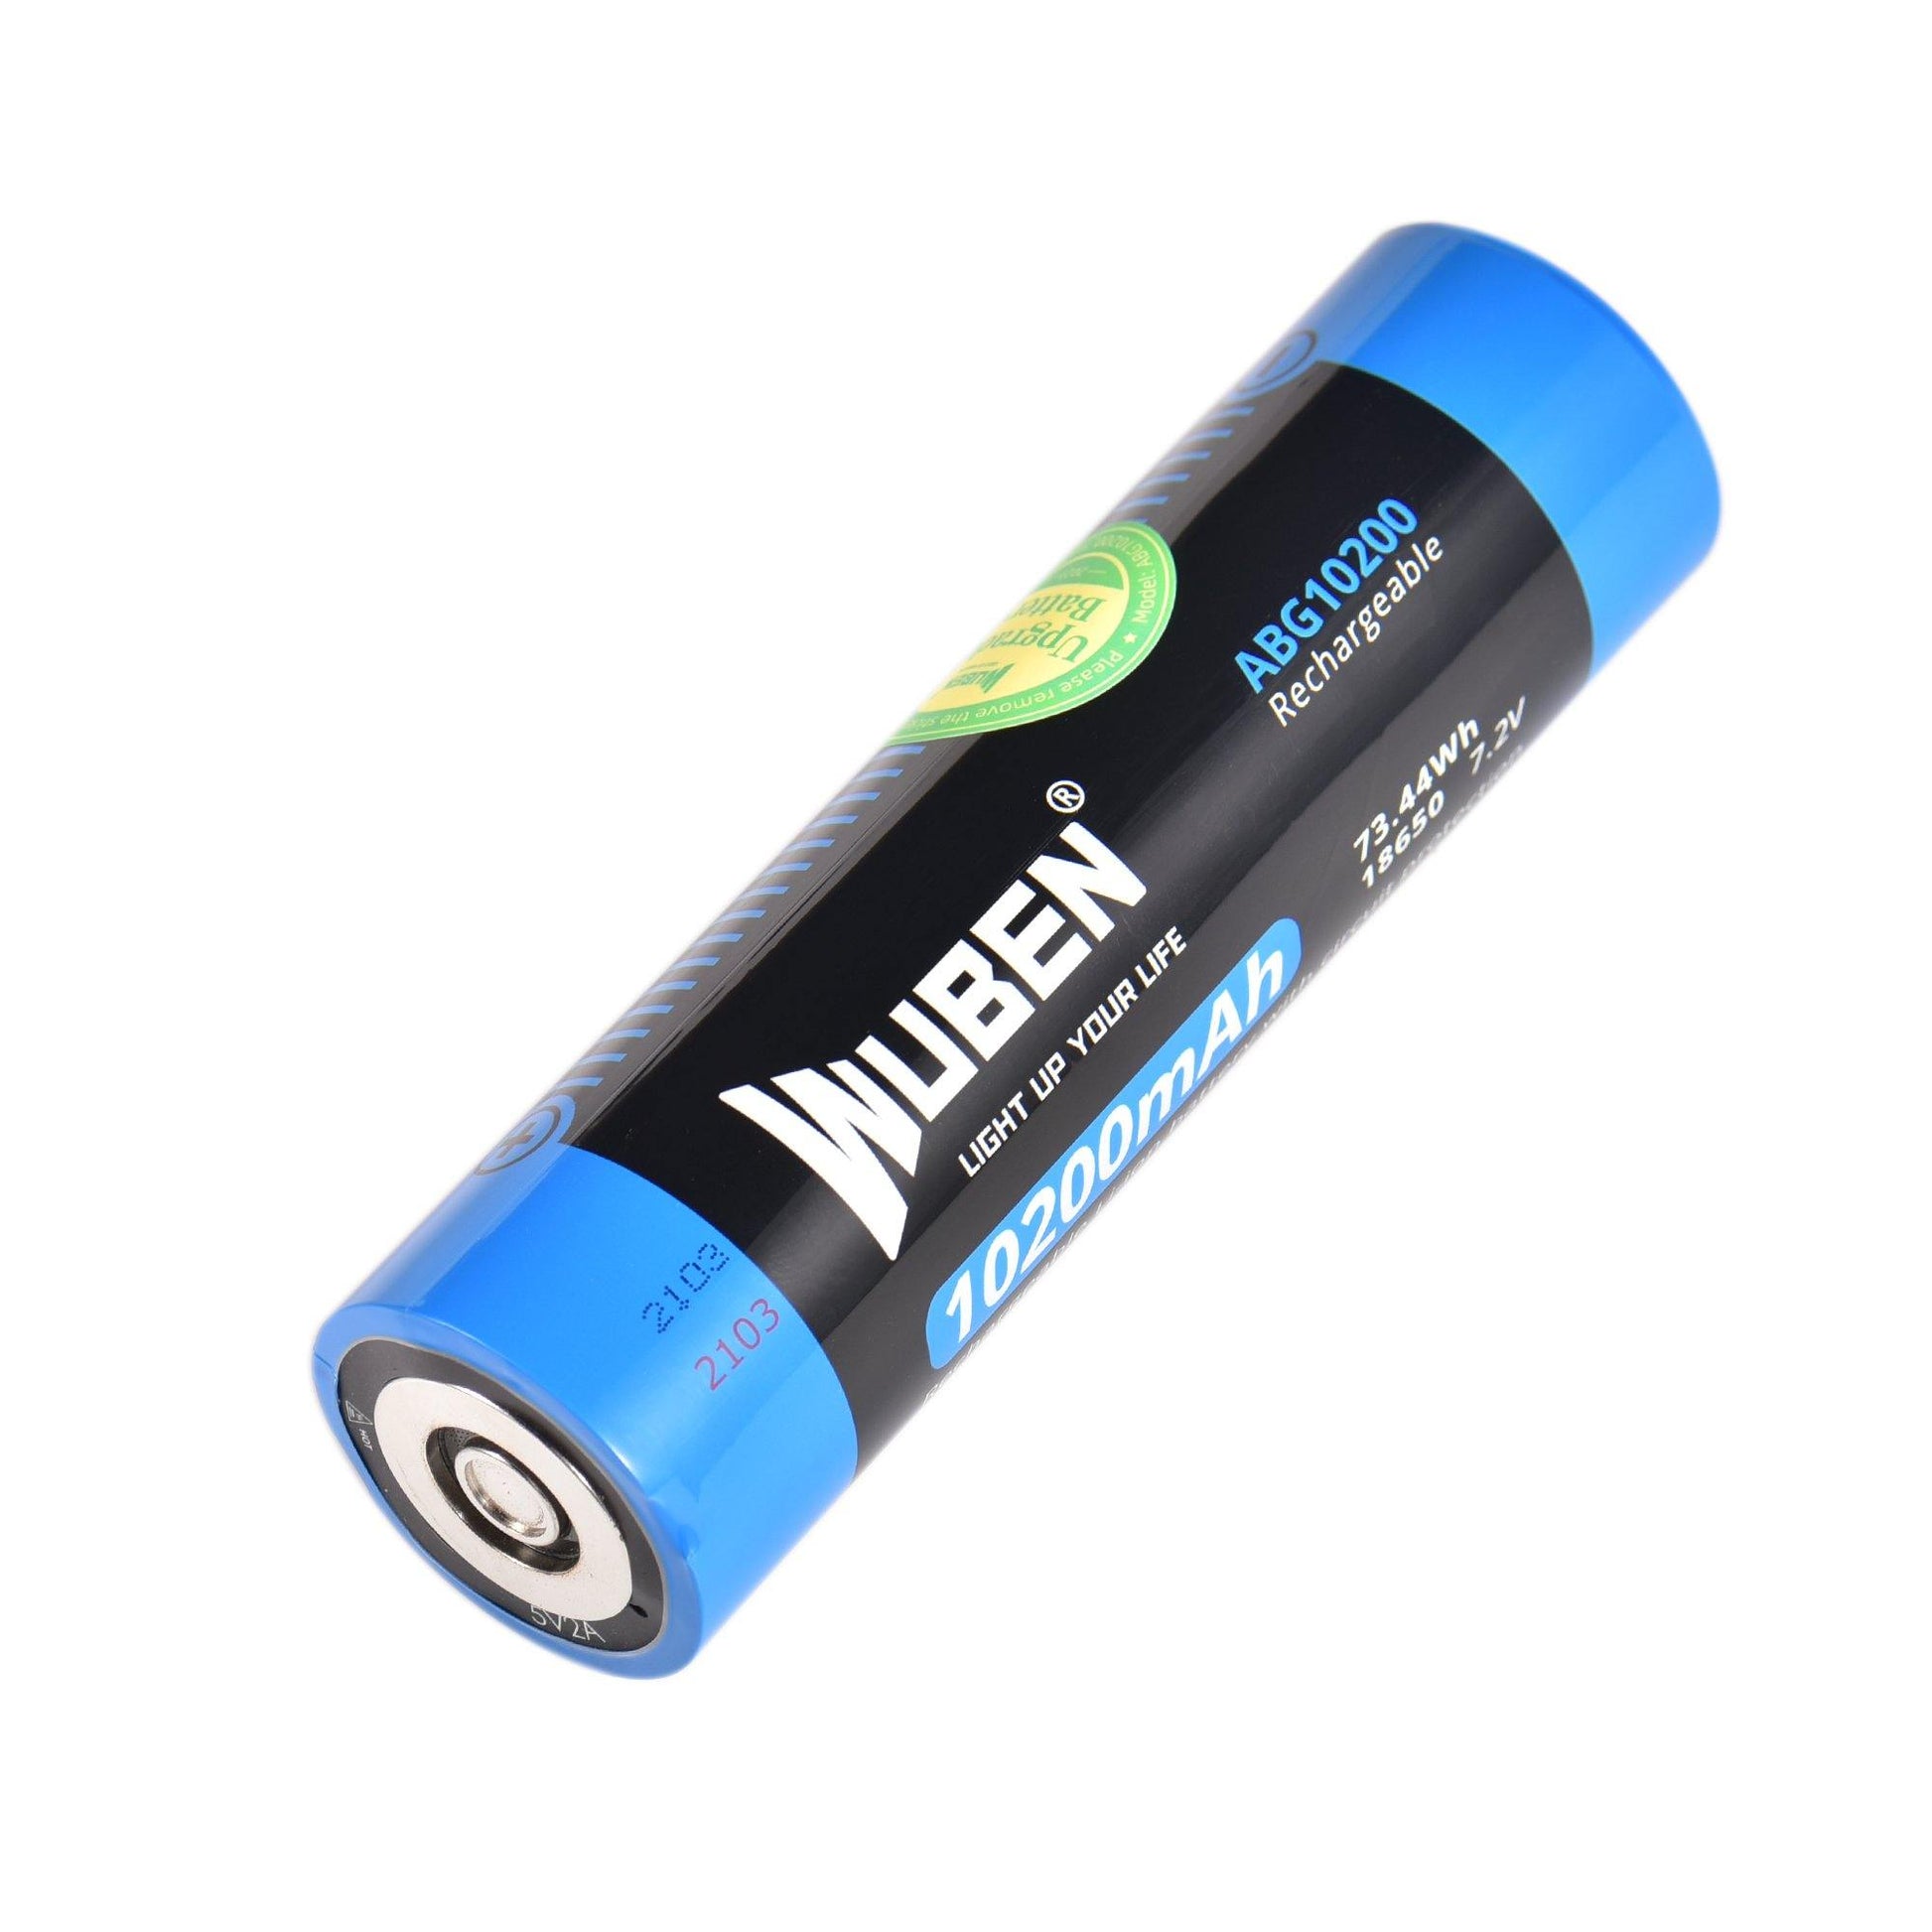 WUBEN A9 spare battery 10200mAh battery - Overview